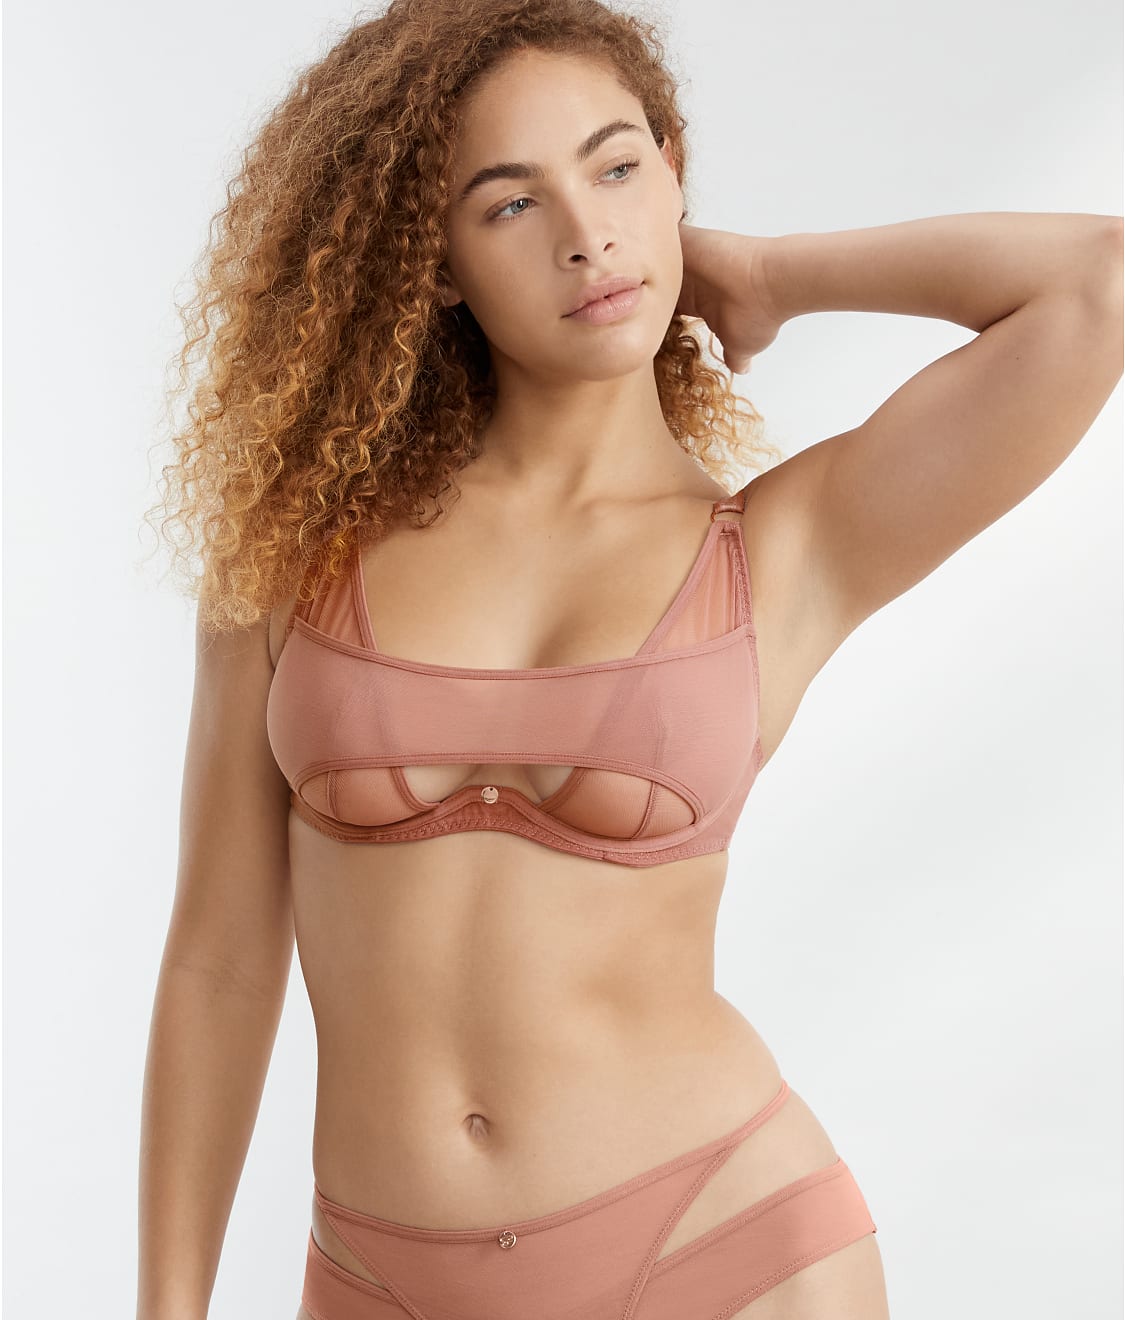 Peek-a-Boo Bras: Peep Show Lingerie Reveals the Essentials, Obscures the  Rest